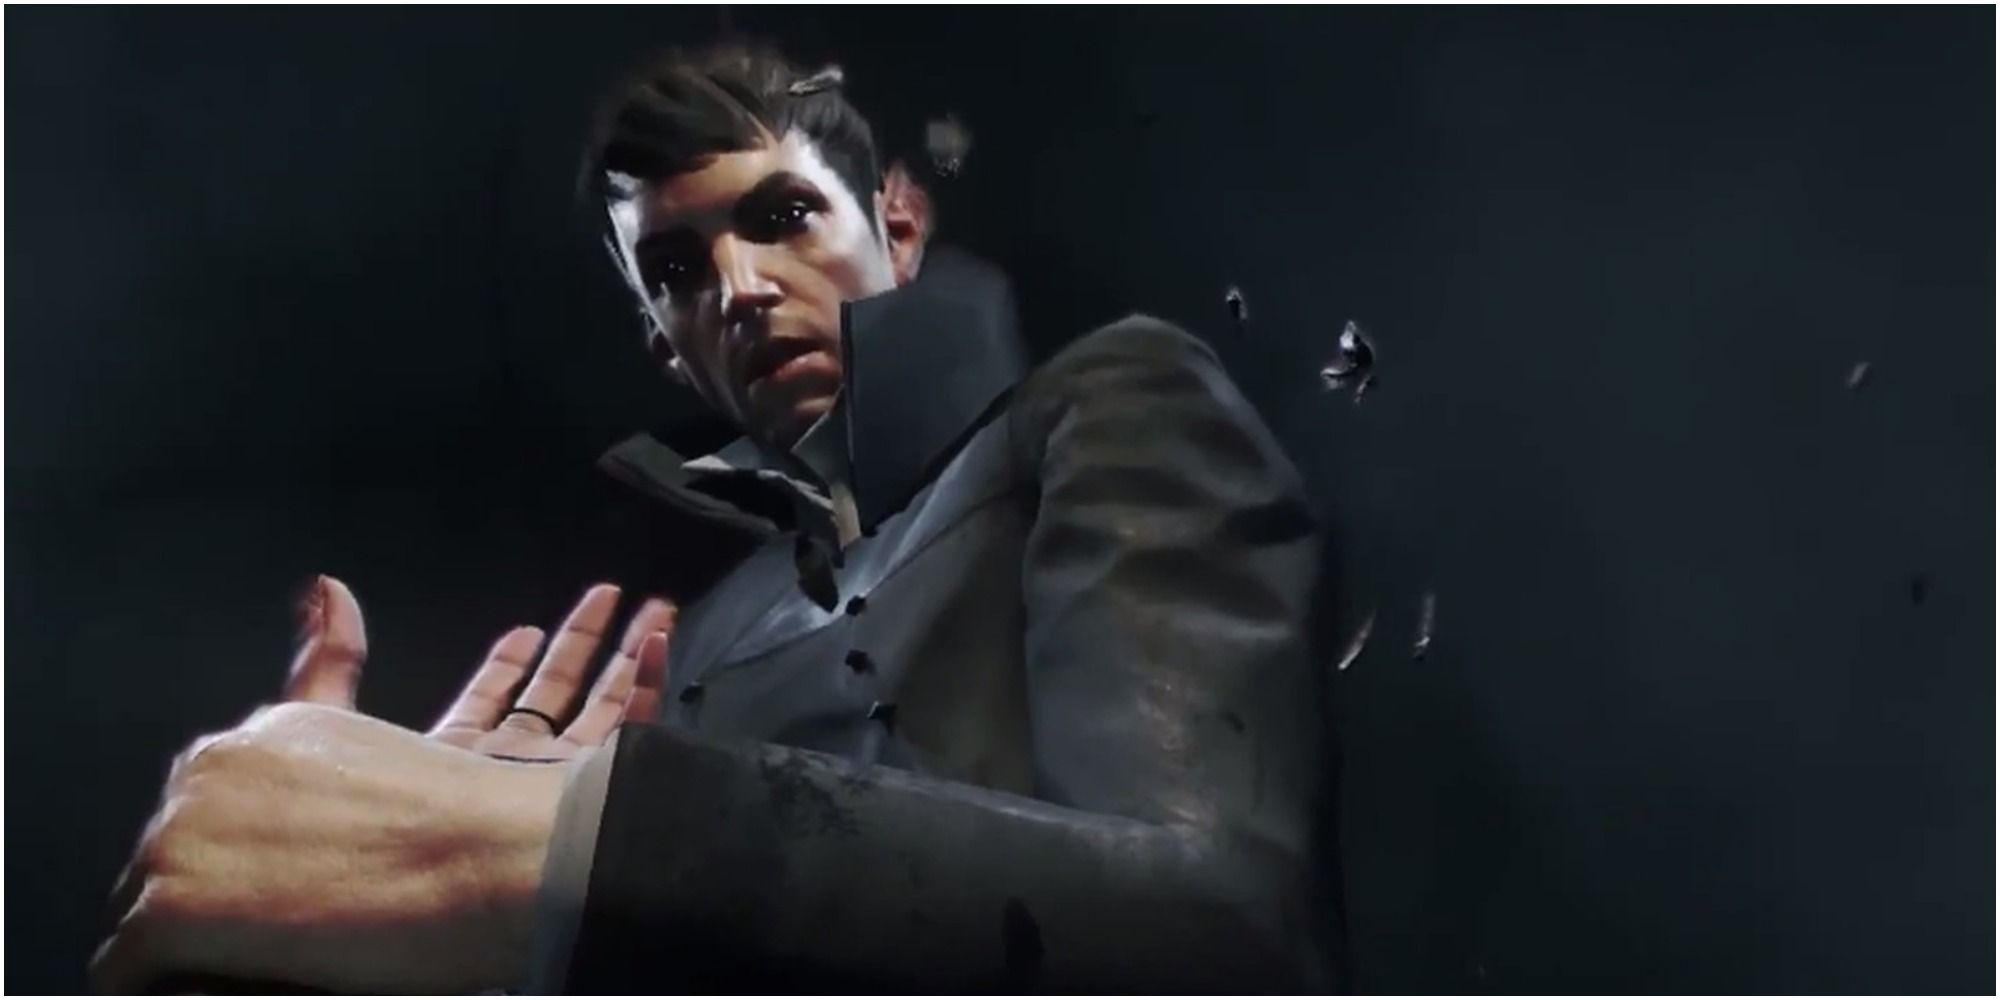 The Outsider from Dishonored looks down at the camera while fidgeting with his sleeve